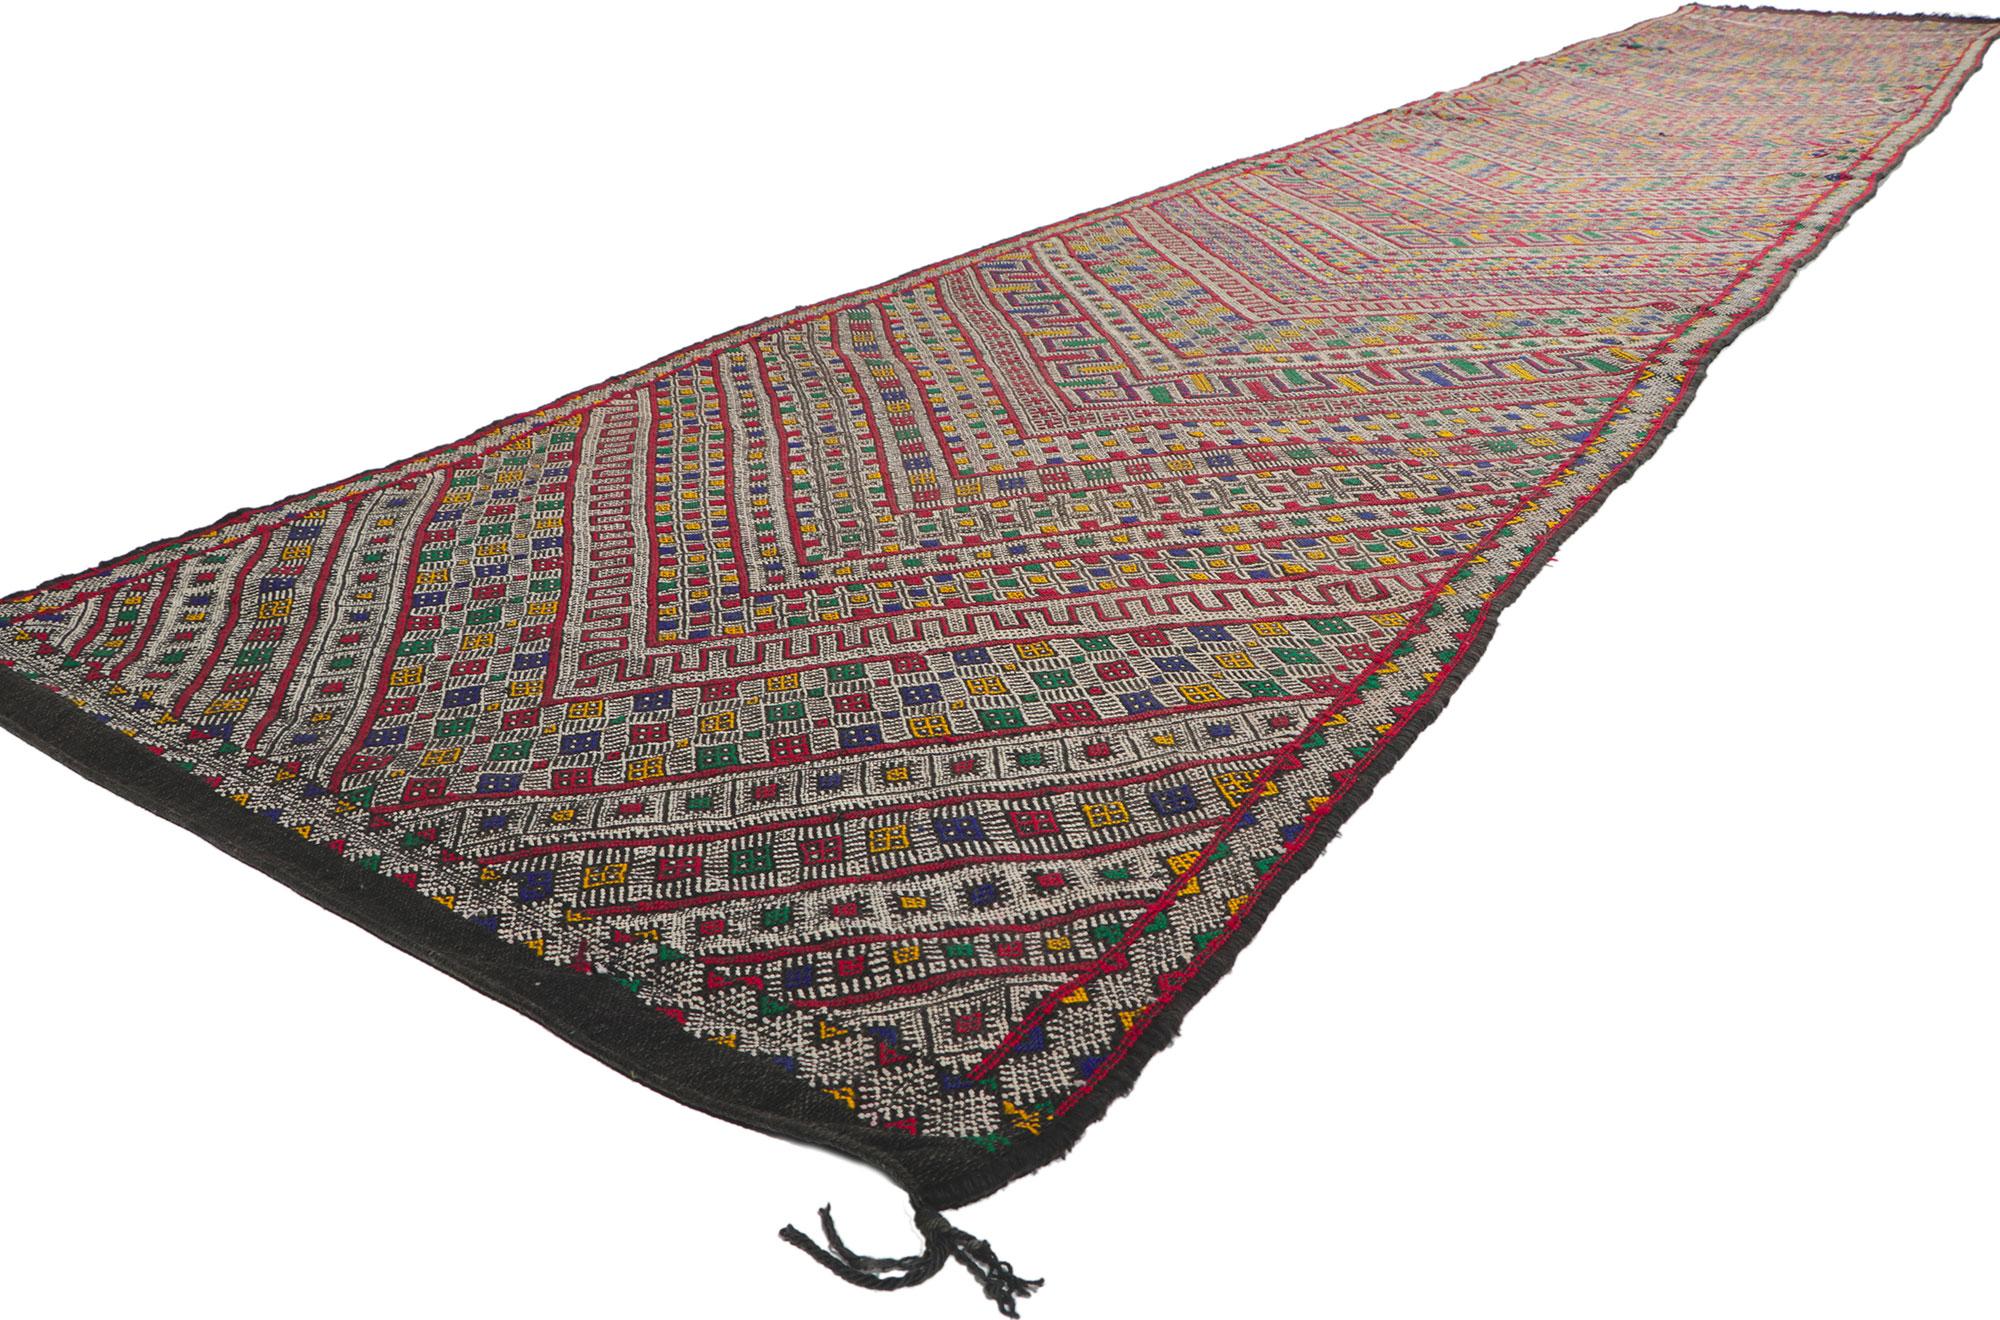 21711 Vintage Zemmour Moroccan Kilim Runner, 03'05 x 22'04. Full of tiny details and tribal style, this hand-woven wool vintage Zemmour Berber Moroccan kilim rug runner is a captivating vision of woven beauty. The abrashed field is composed of